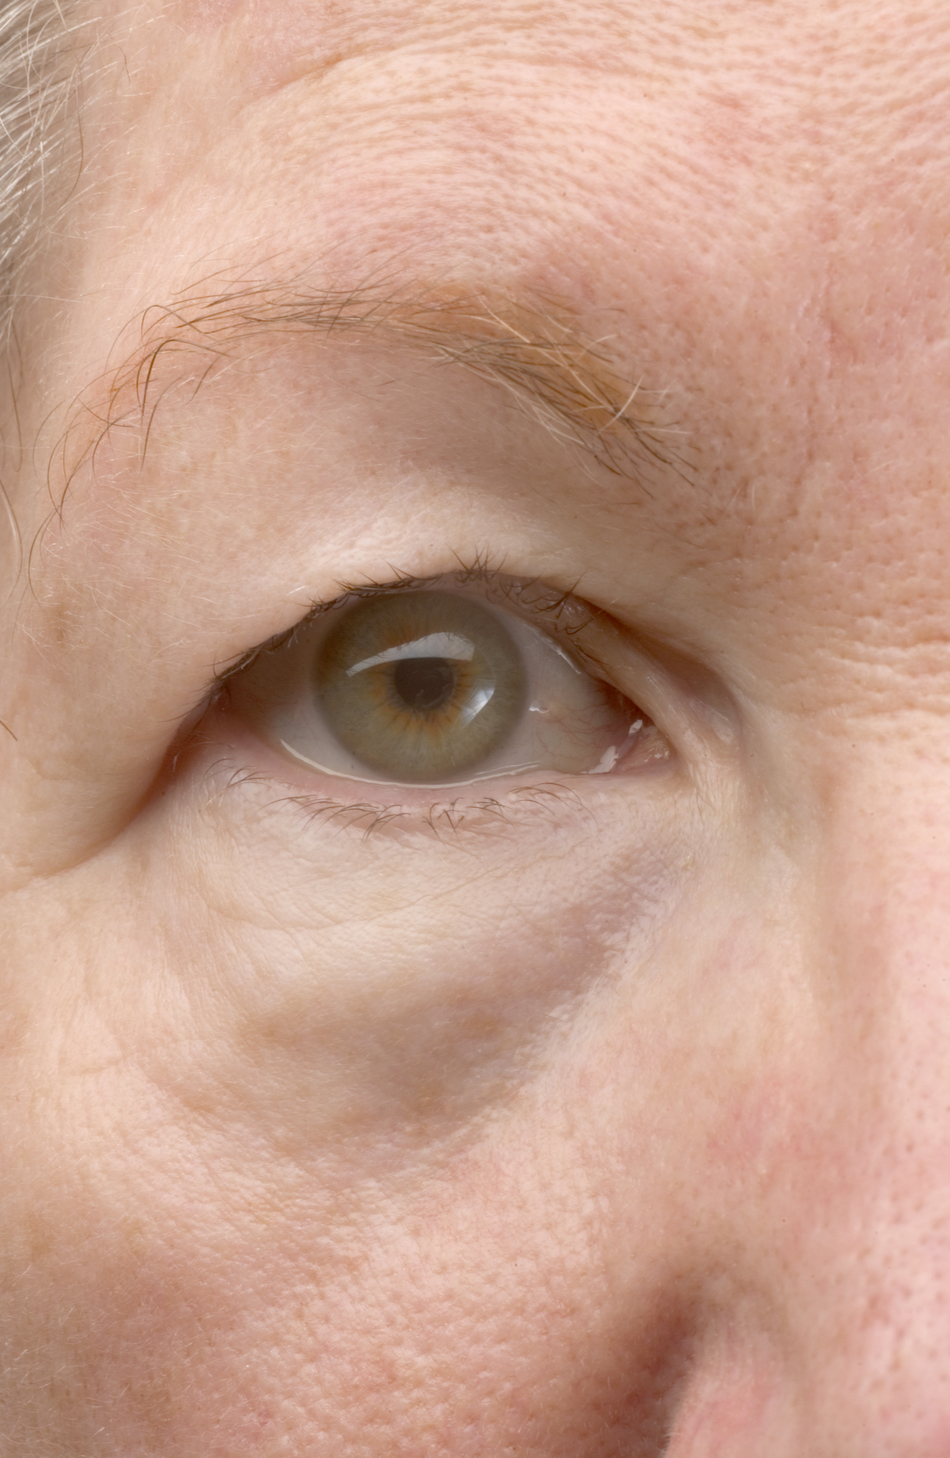 How to Fix Droopy Eyelids?